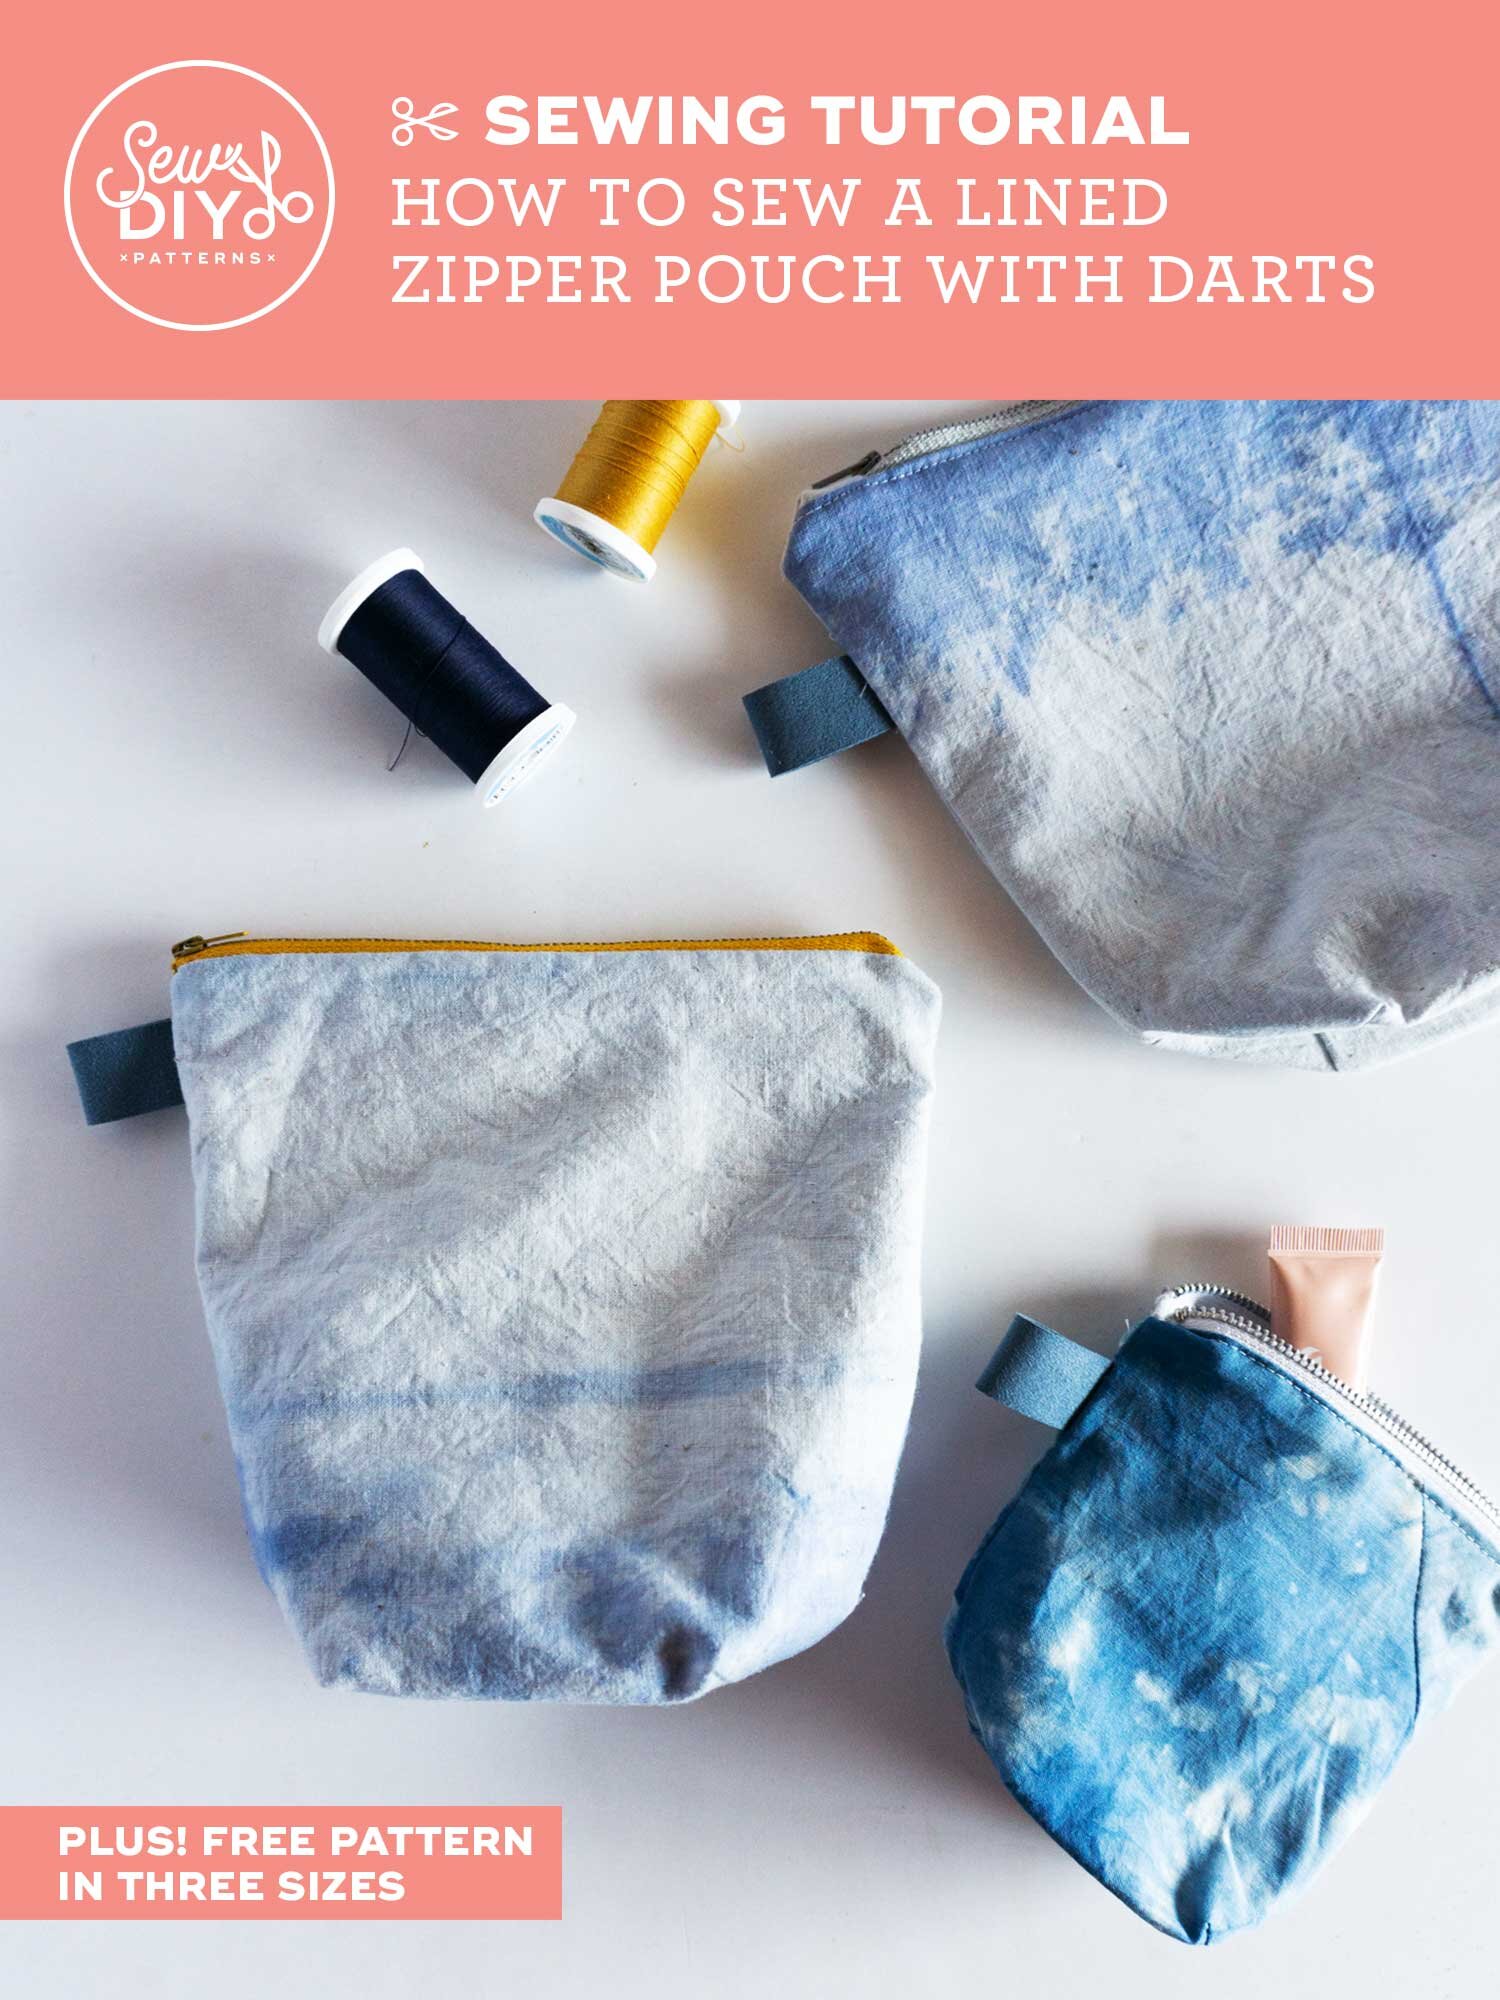 VIDEO How to sew a lined zipper pouch — Sew DIY